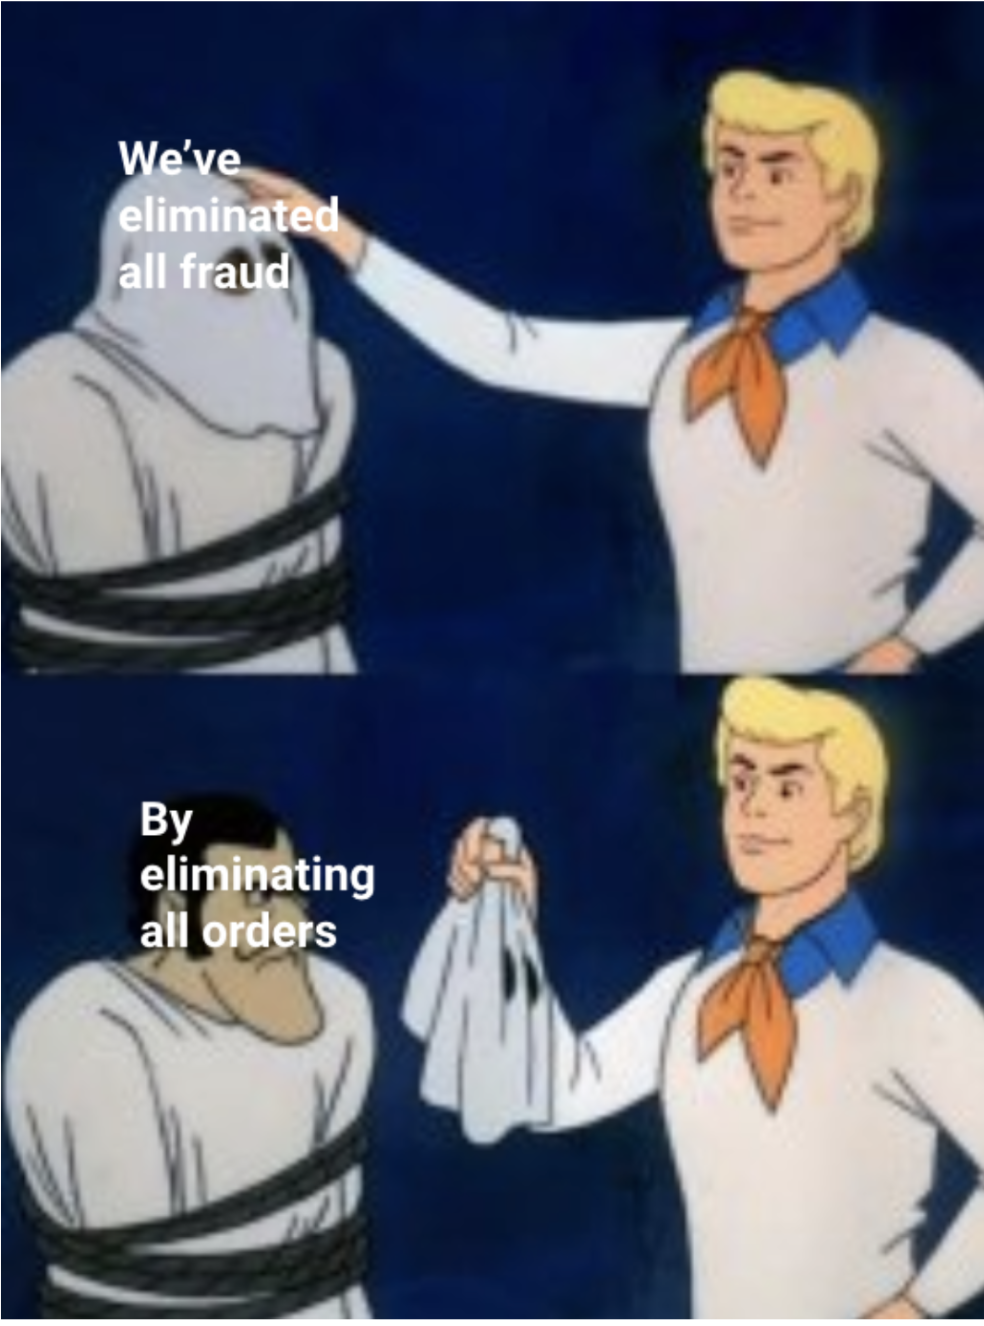 Scooby Doo meme, showing Fred unmasking the baddie. Before unmasking the baddie is captioned with "We've eliminated all fraud", and after unmasking says "by eliminating all orders"